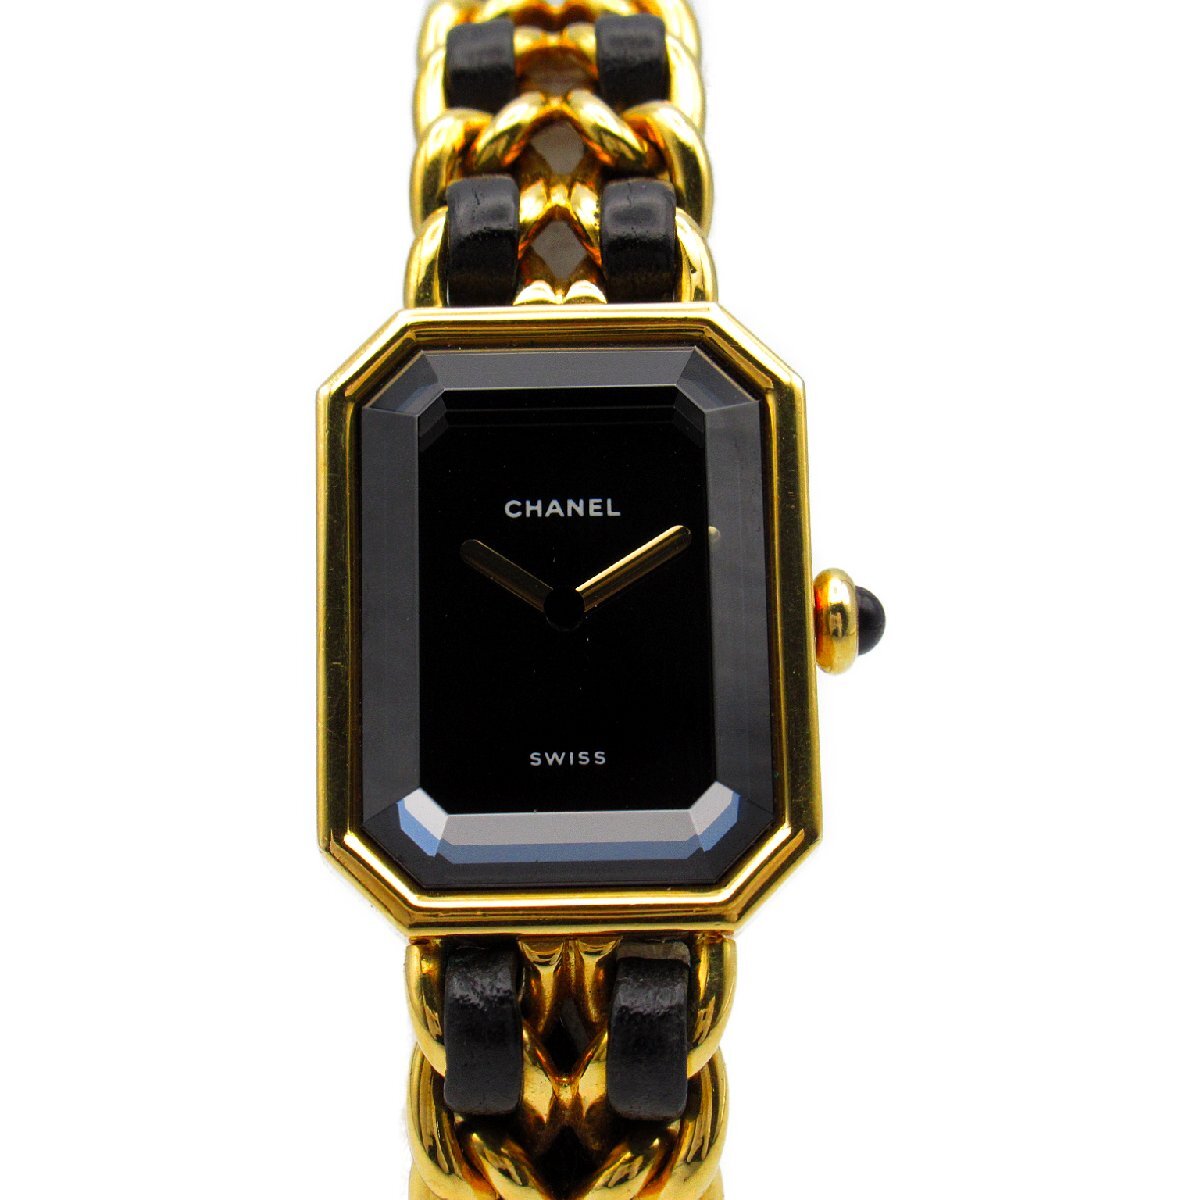  Chanel Premiere M brand off CHANEL GP( Gold plating ) wristwatch GP/ leather used lady's 